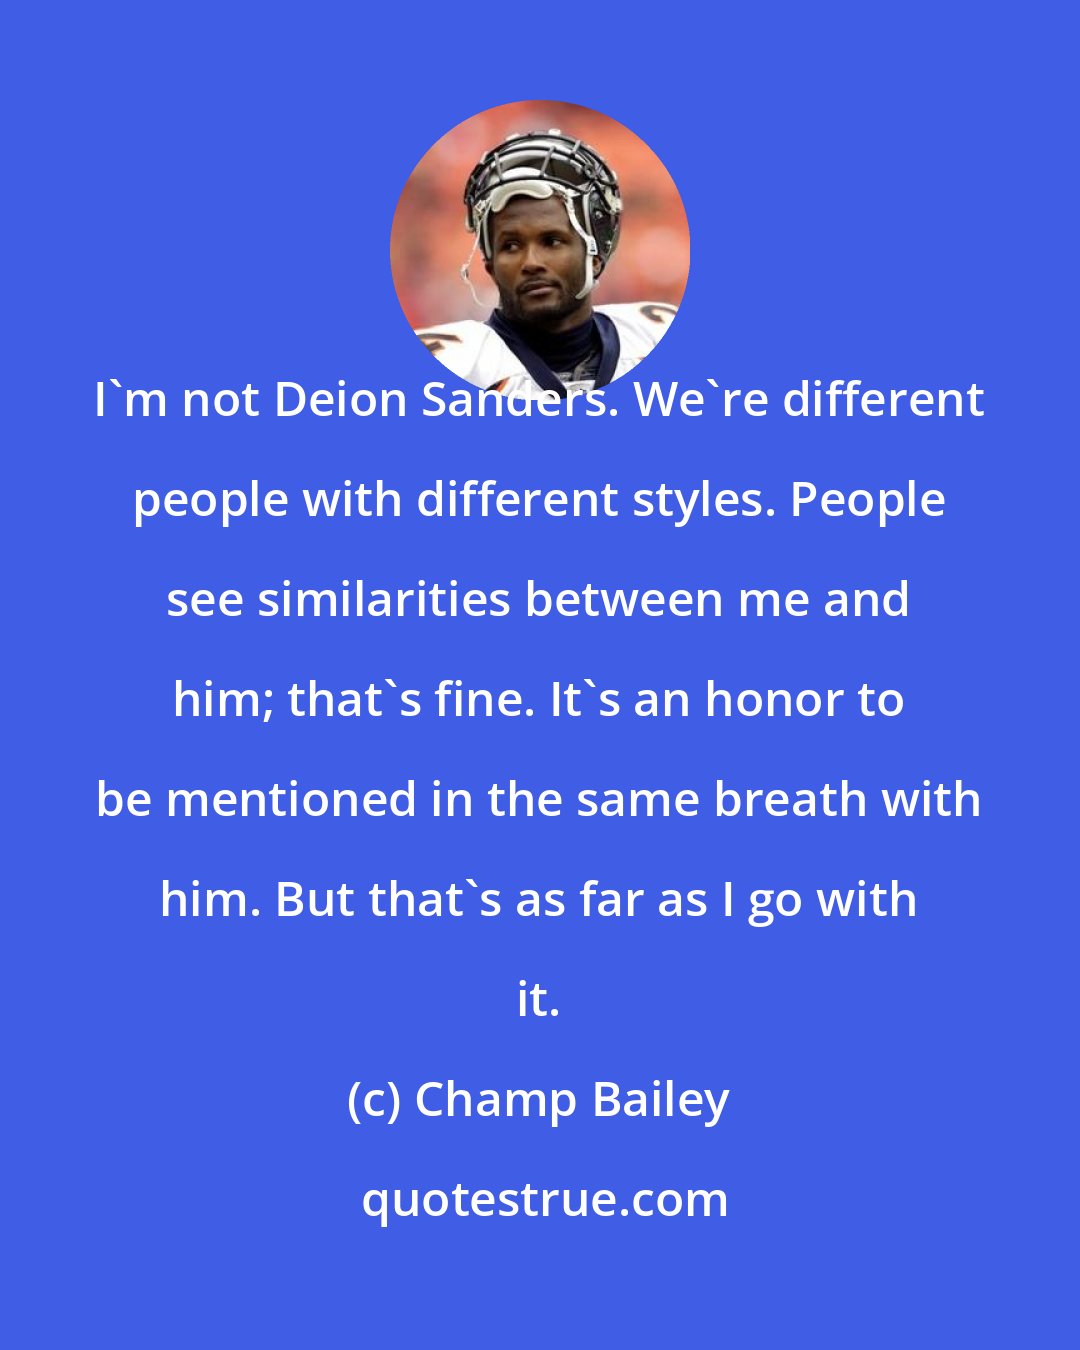 Champ Bailey: I'm not Deion Sanders. We're different people with different styles. People see similarities between me and him; that's fine. It's an honor to be mentioned in the same breath with him. But that's as far as I go with it.